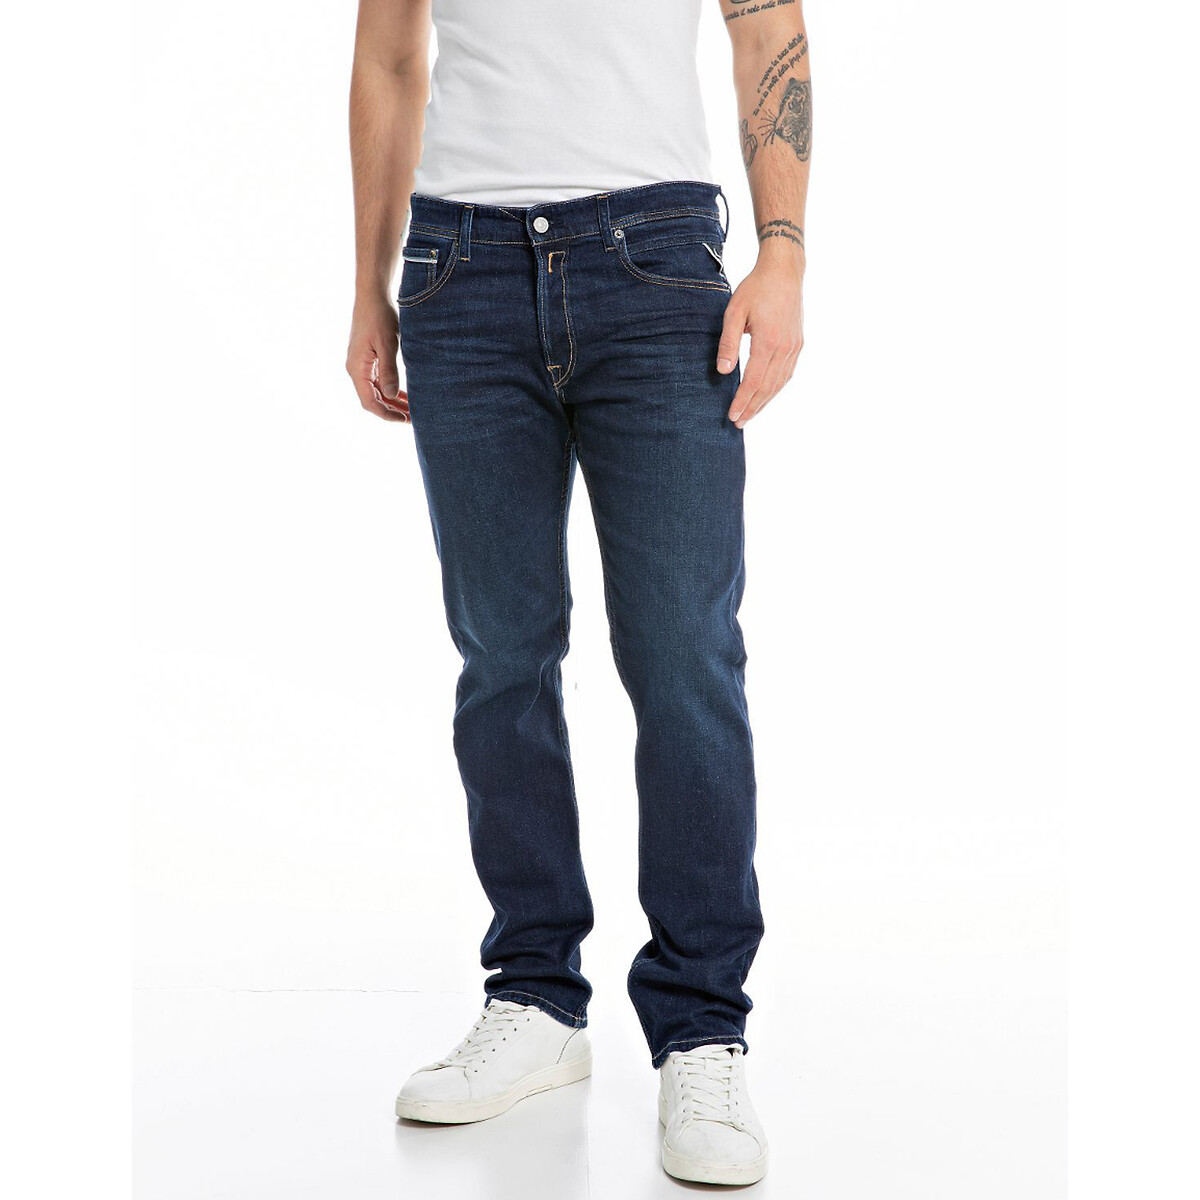 Jeans Grover, Regular-Fit von Replay